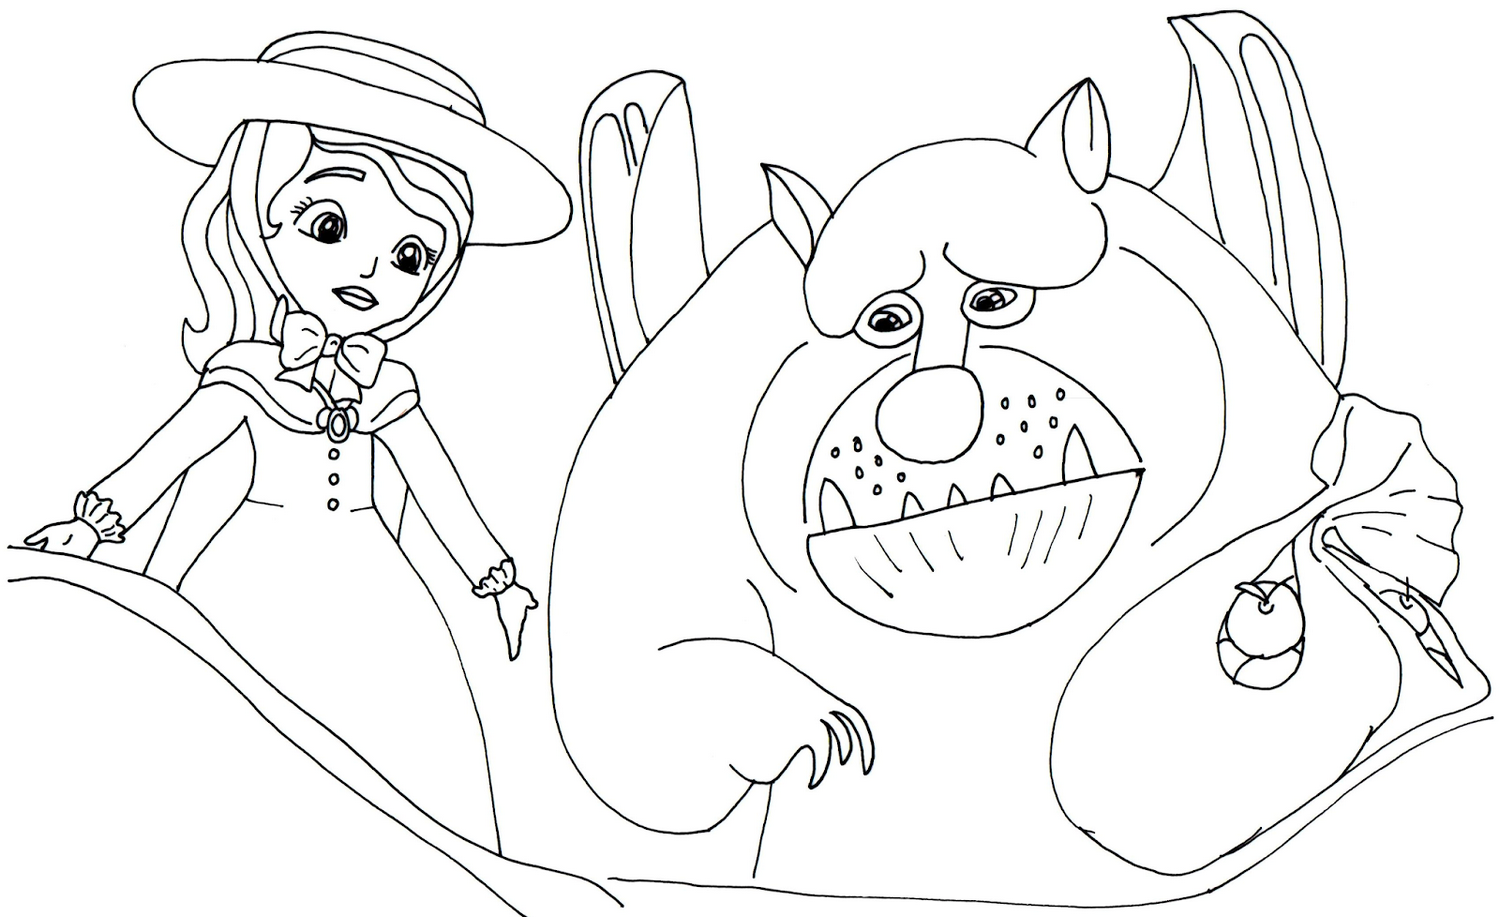 Sofia-the-first-coloring-picture-